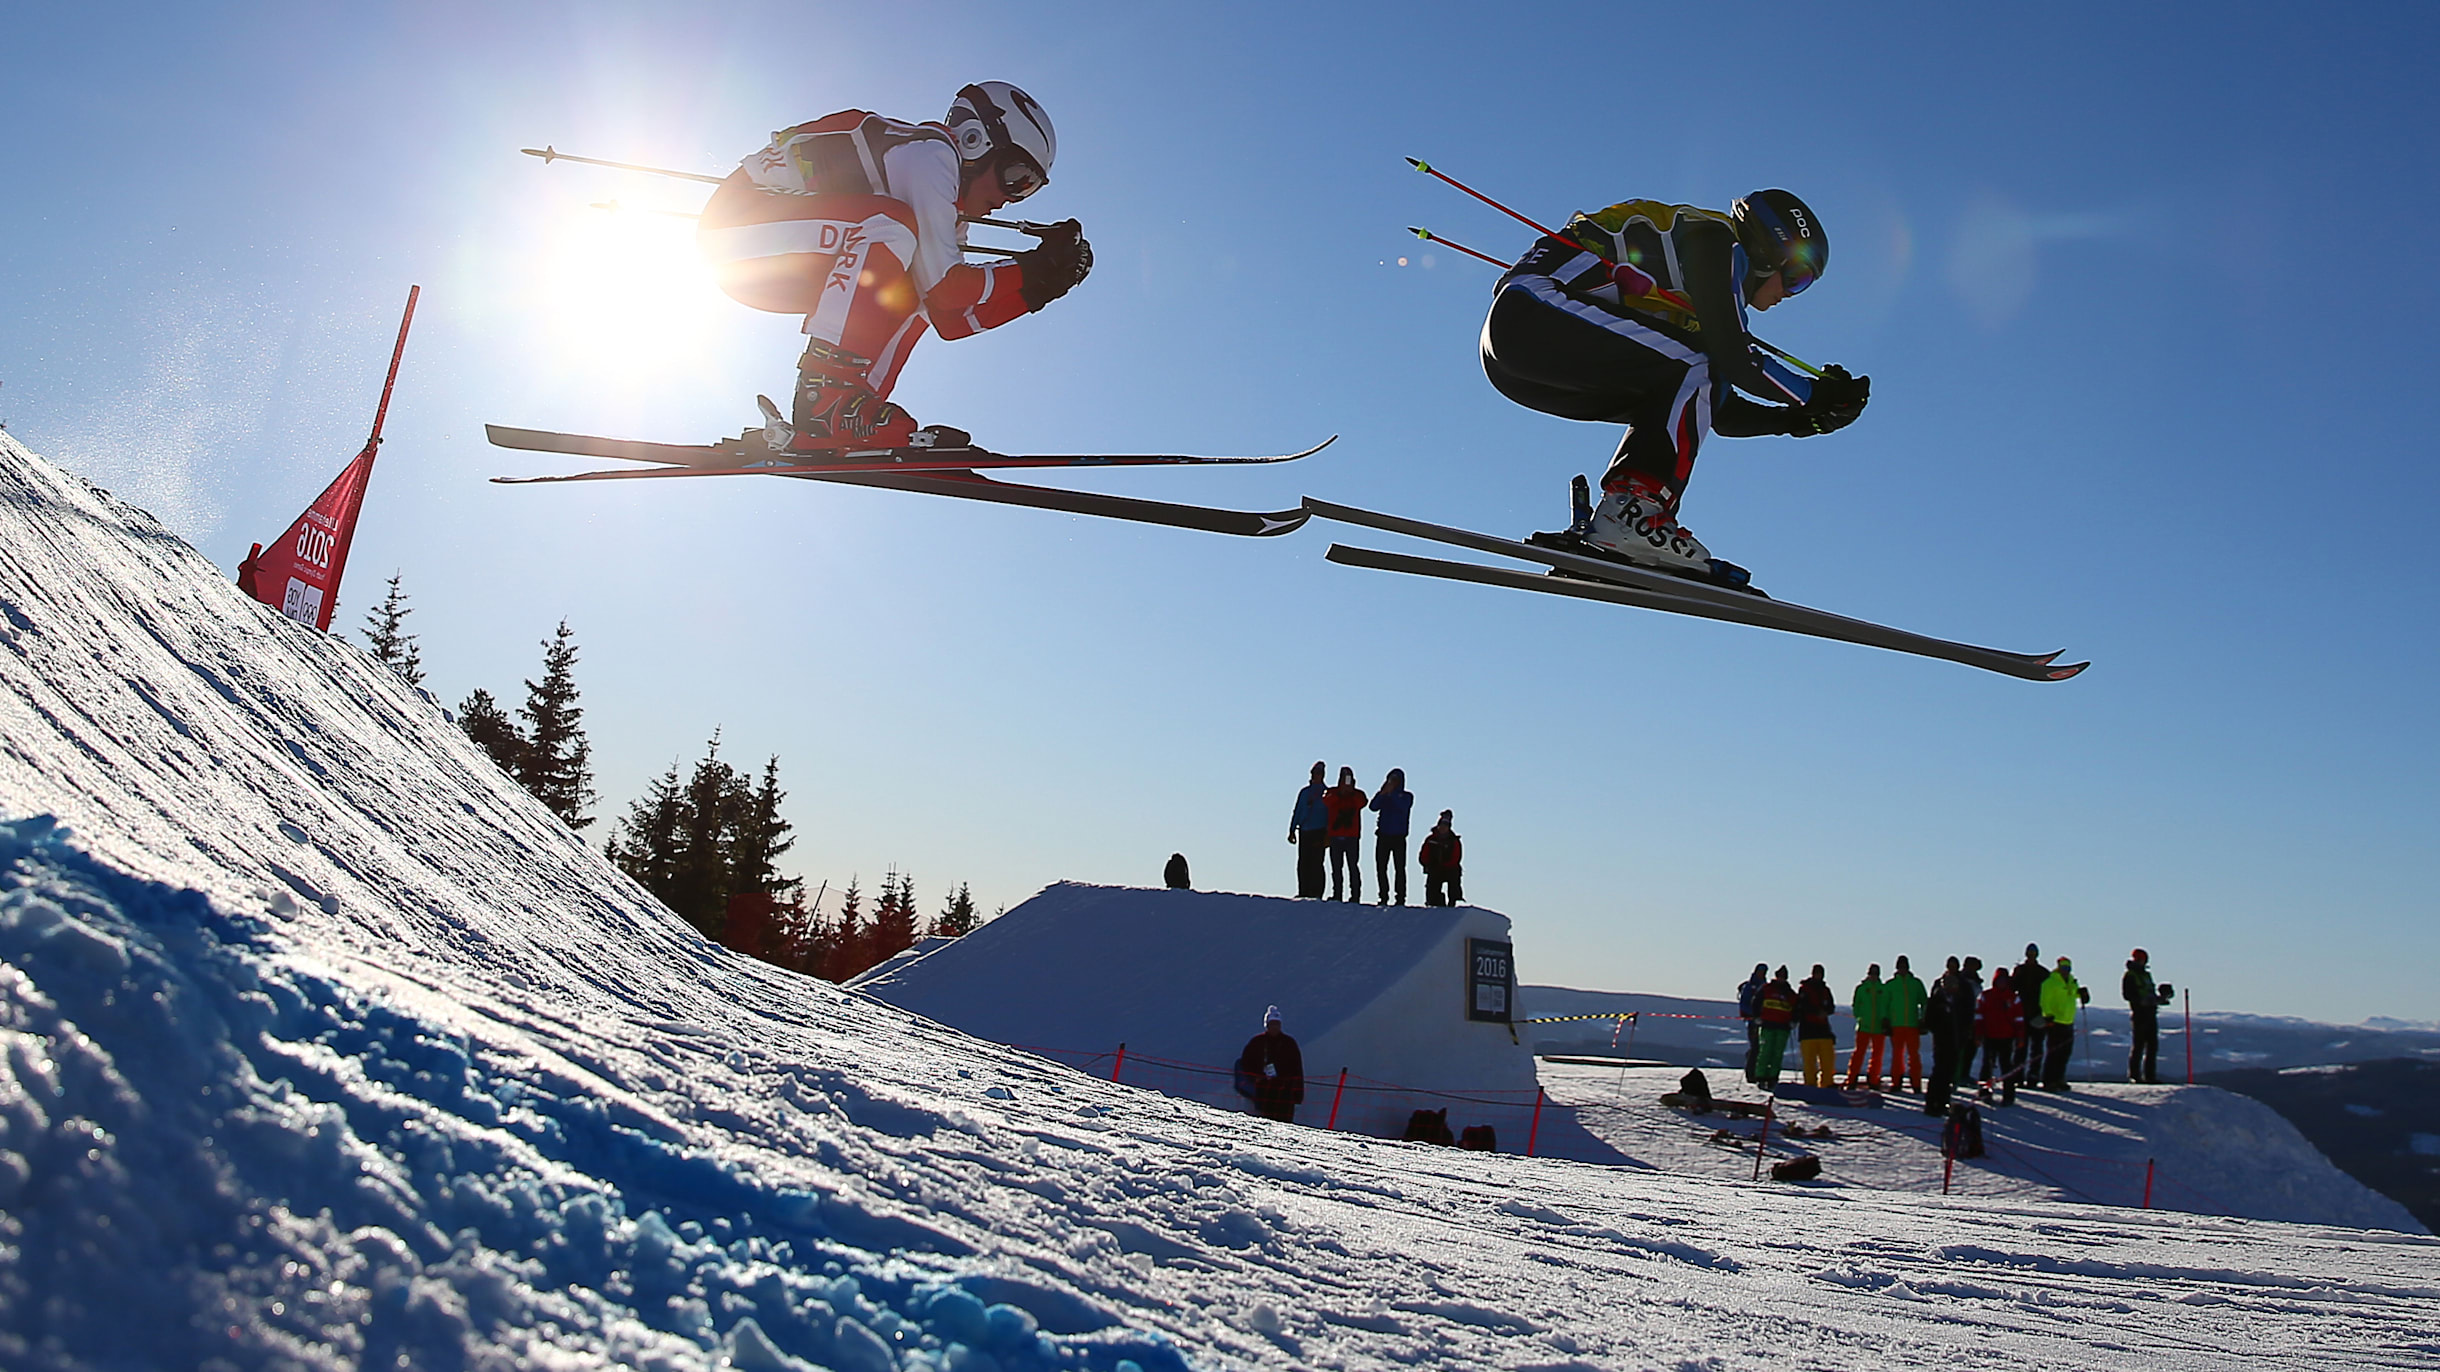 Freestyle skiing at Lausanne 2020 The events and full schedule